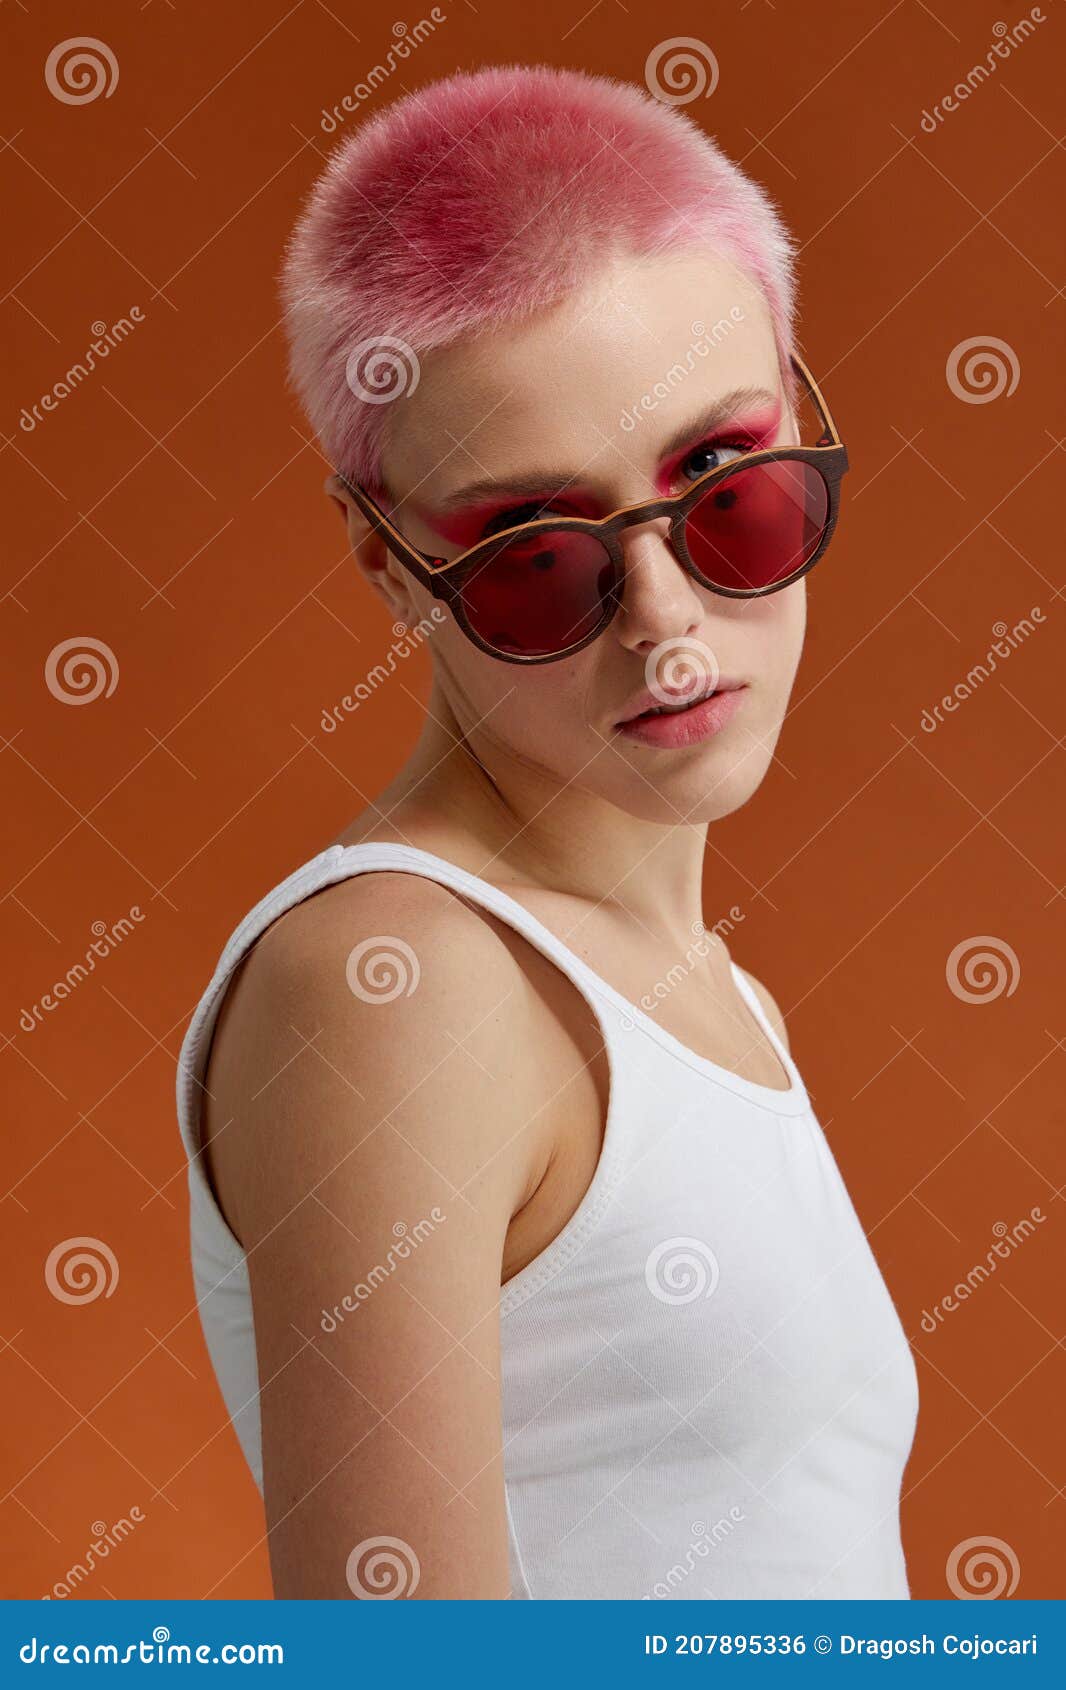 nonconformist girl with pink short hairs with red sunglasses, over brown background